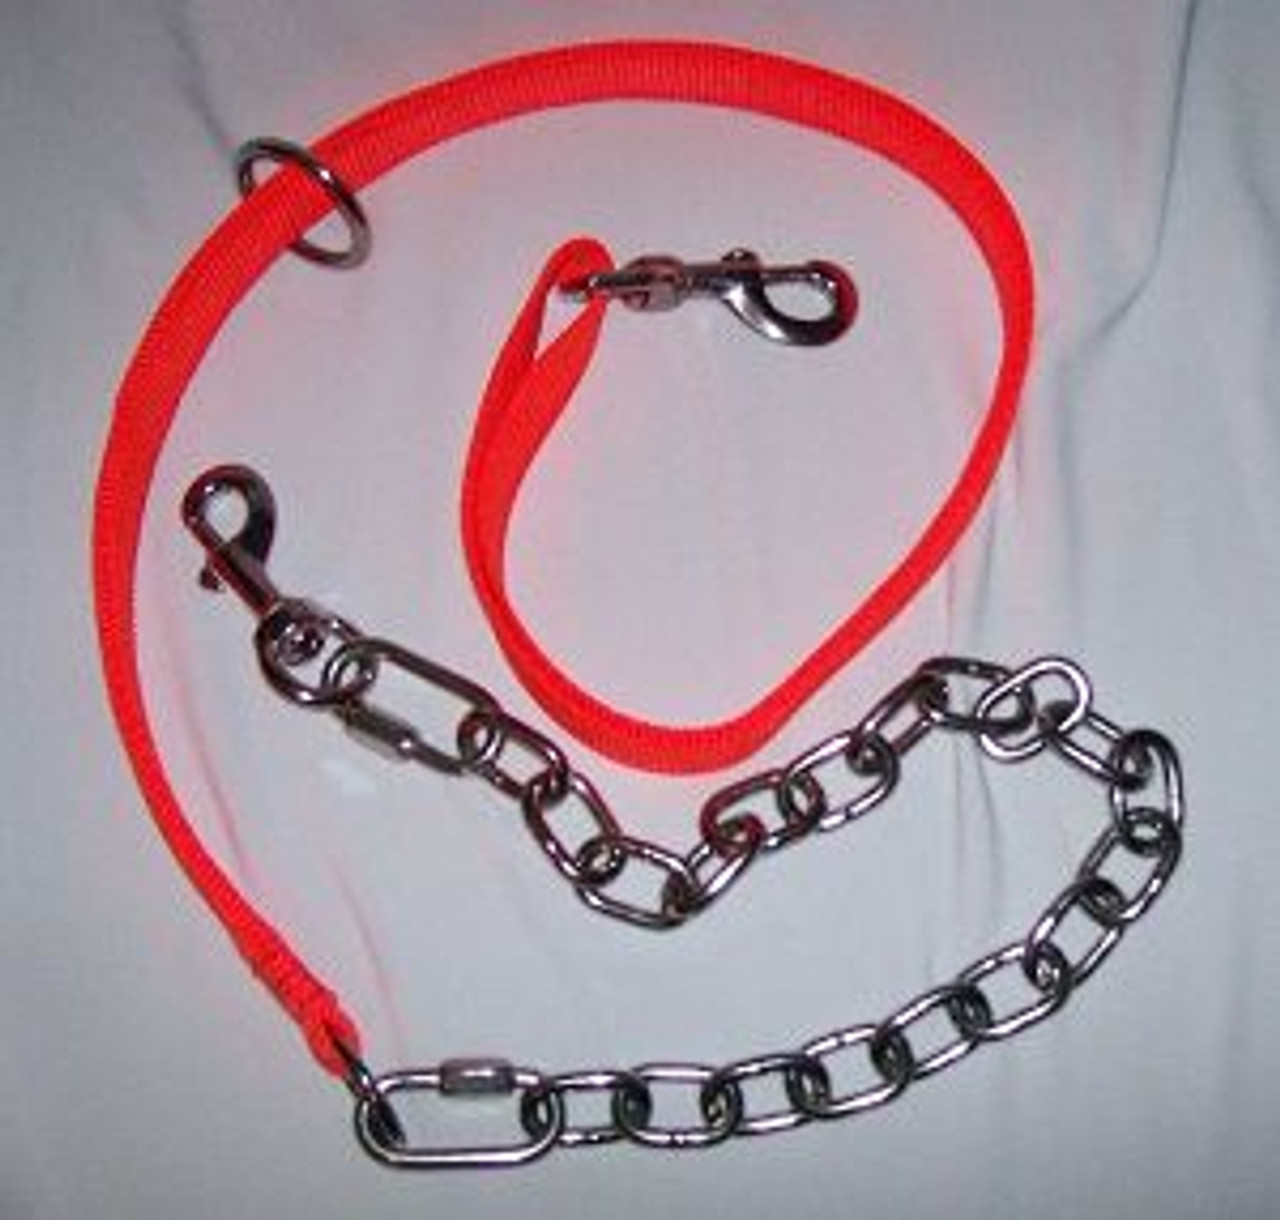 STAINLESS CHAIN/NYLON LEAD - Wild Boar USA/Ugly Dog Ranch